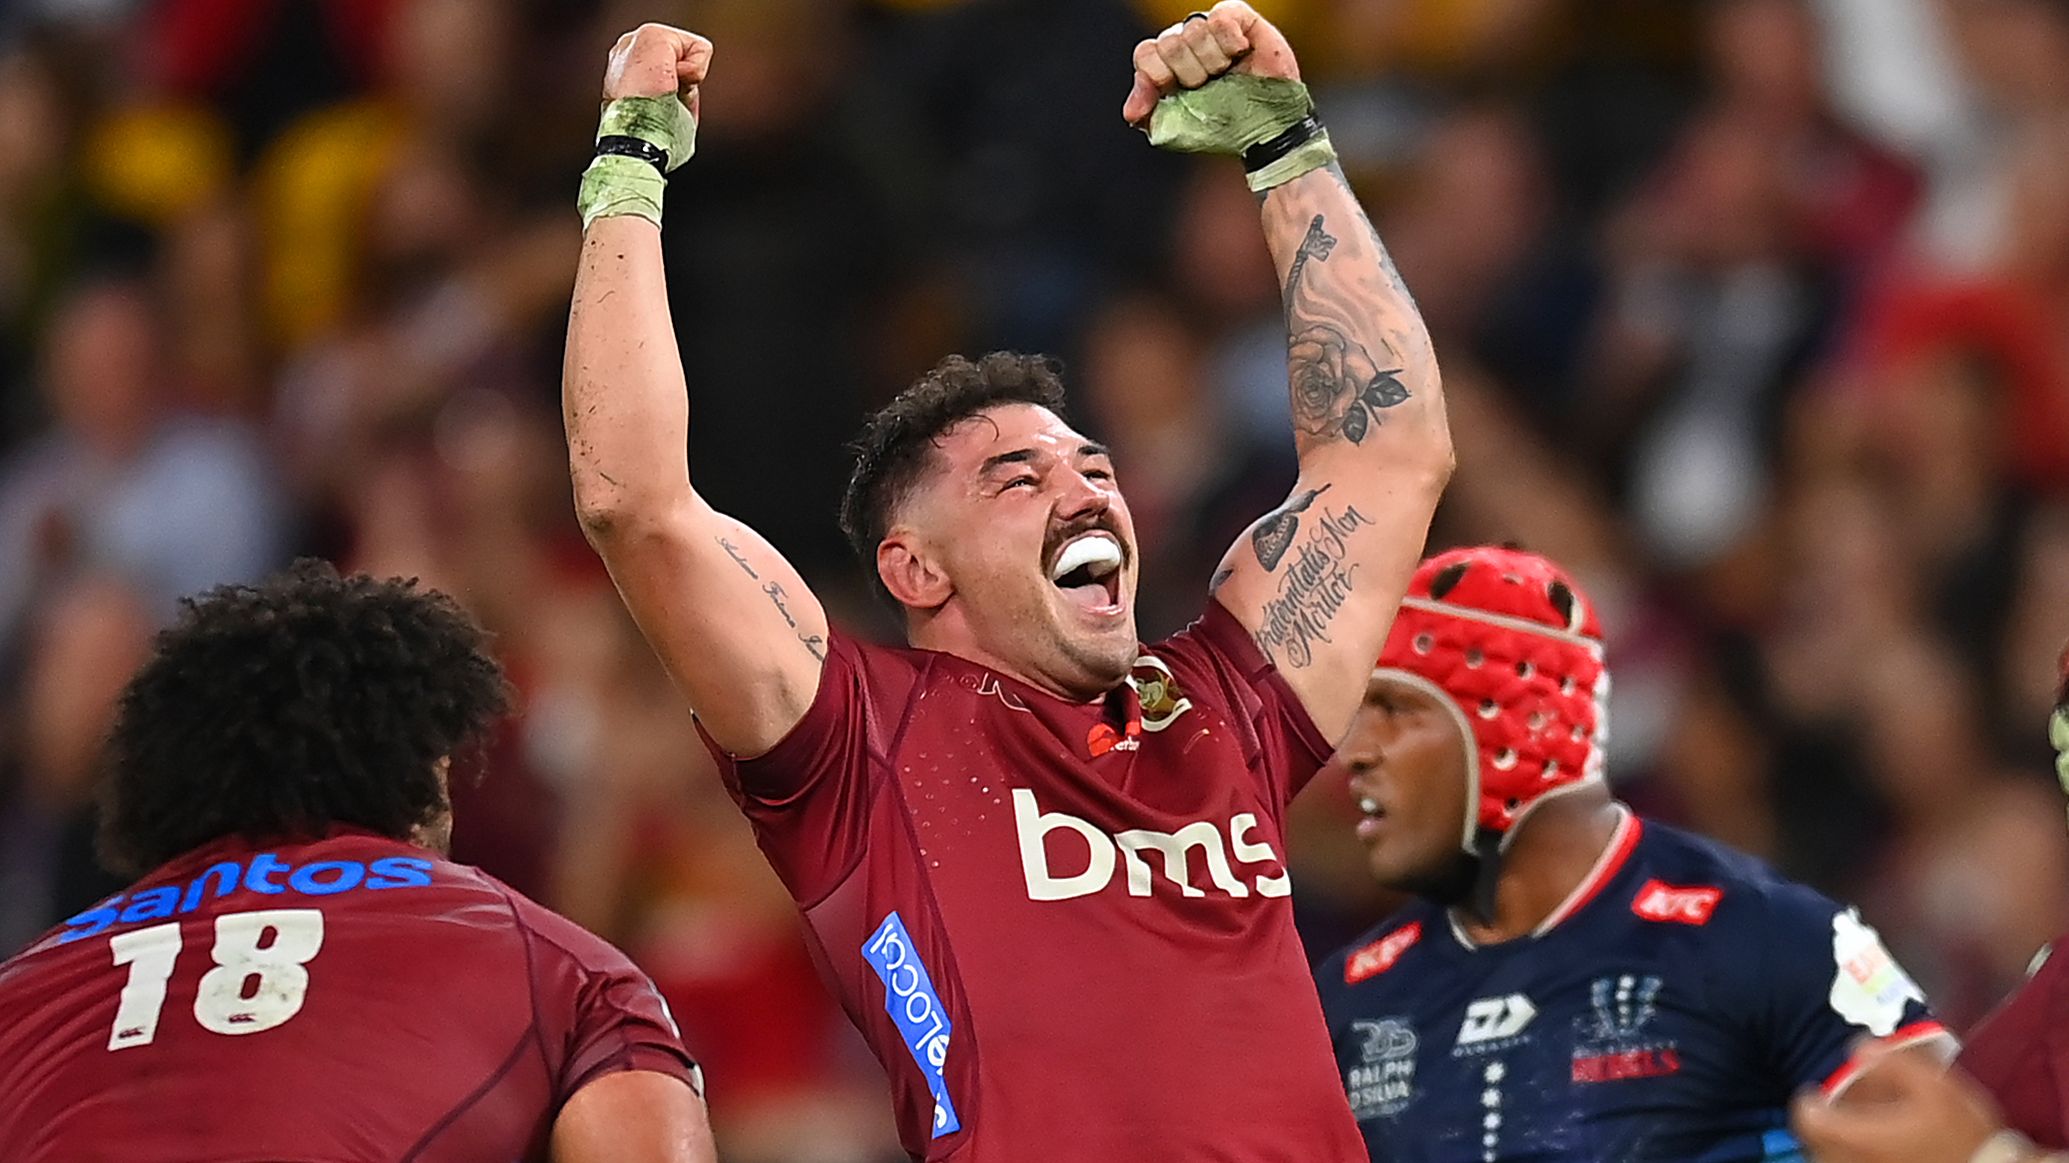 Jeff Toomaga-Allen of the Reds celebrates victory during the round 12 Super Rugby Pacific match between Queensland Reds and Melbourne Rebels.